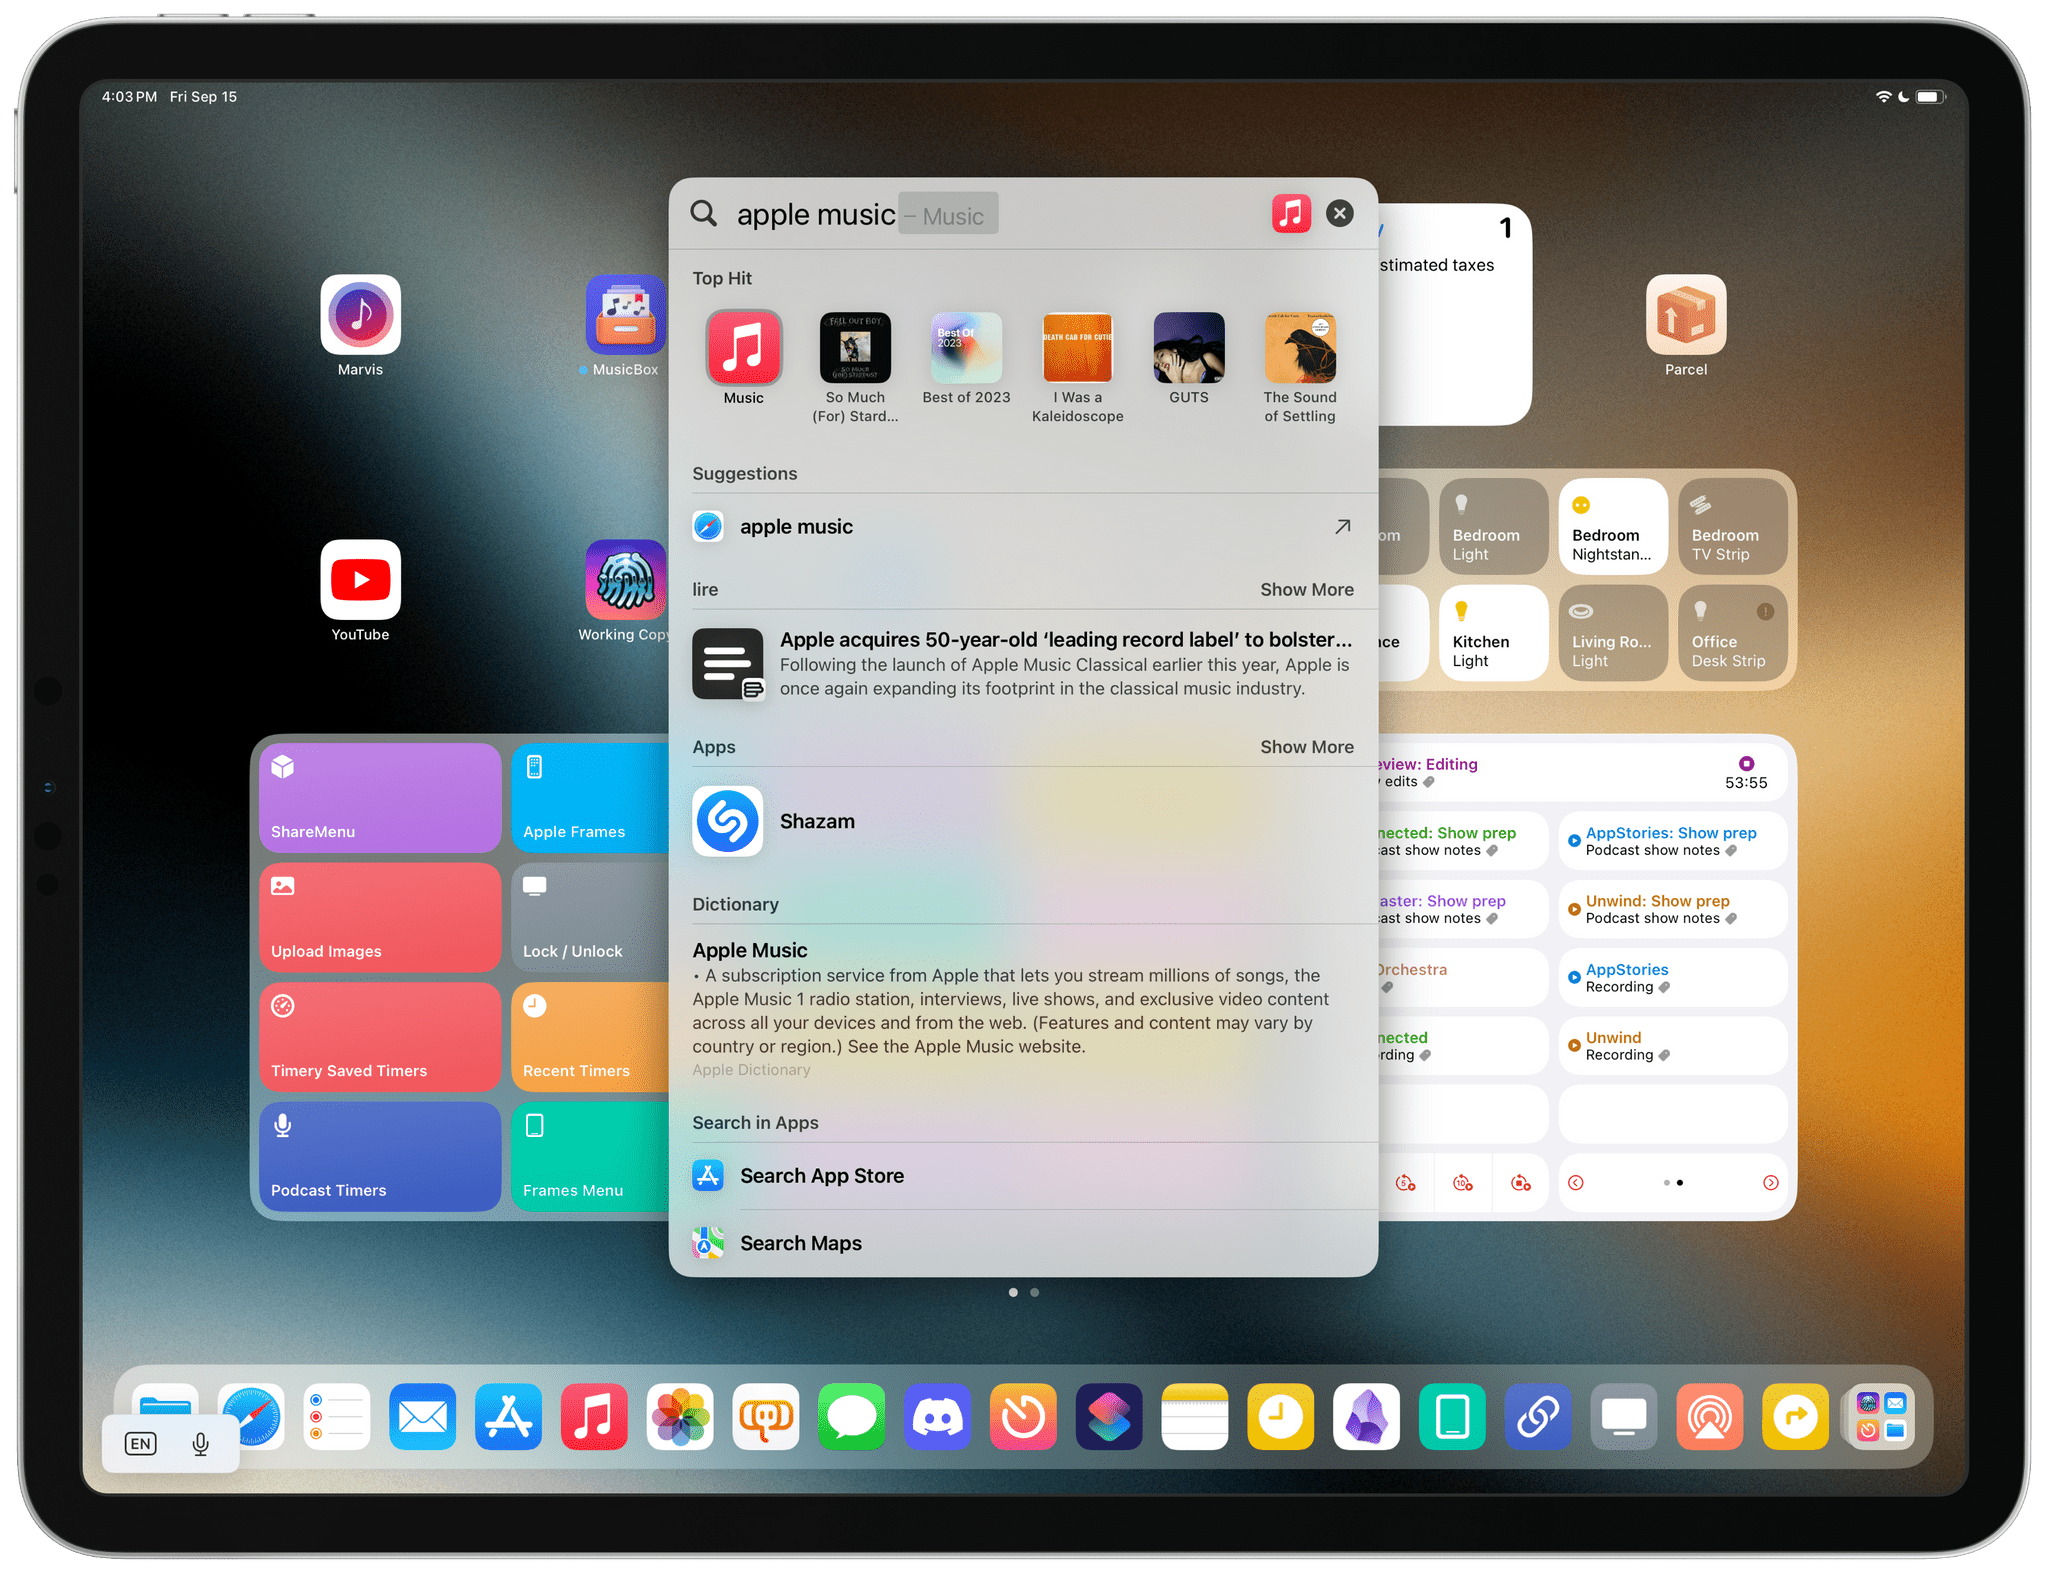 The iPad version of Spotlight can show more App Shortcuts as Top Hits.